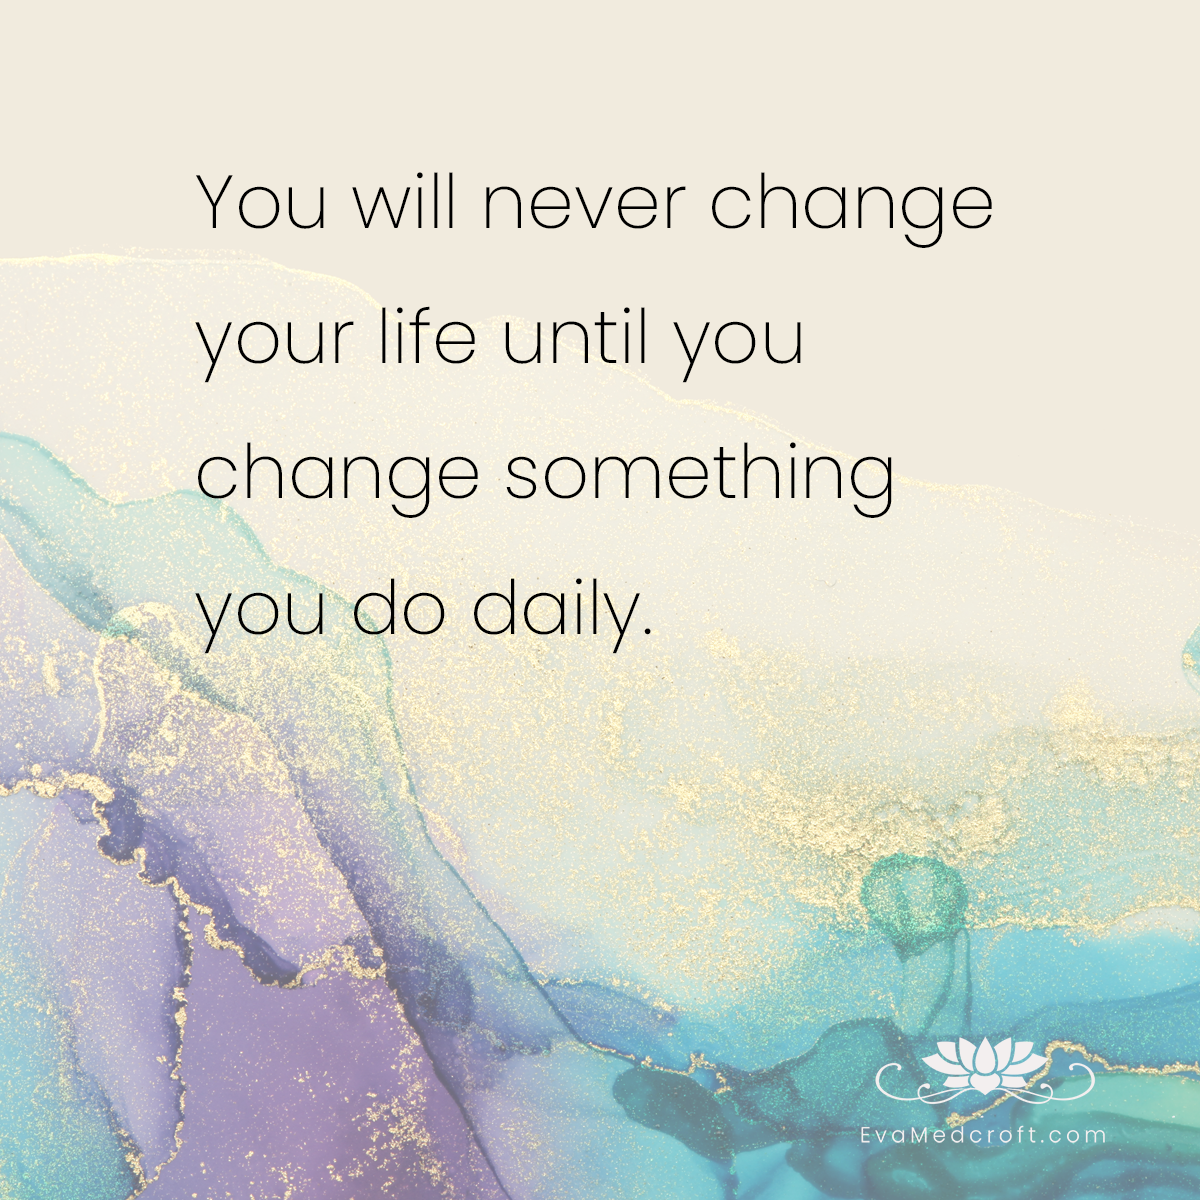 You will never change your life until you change something you do daily